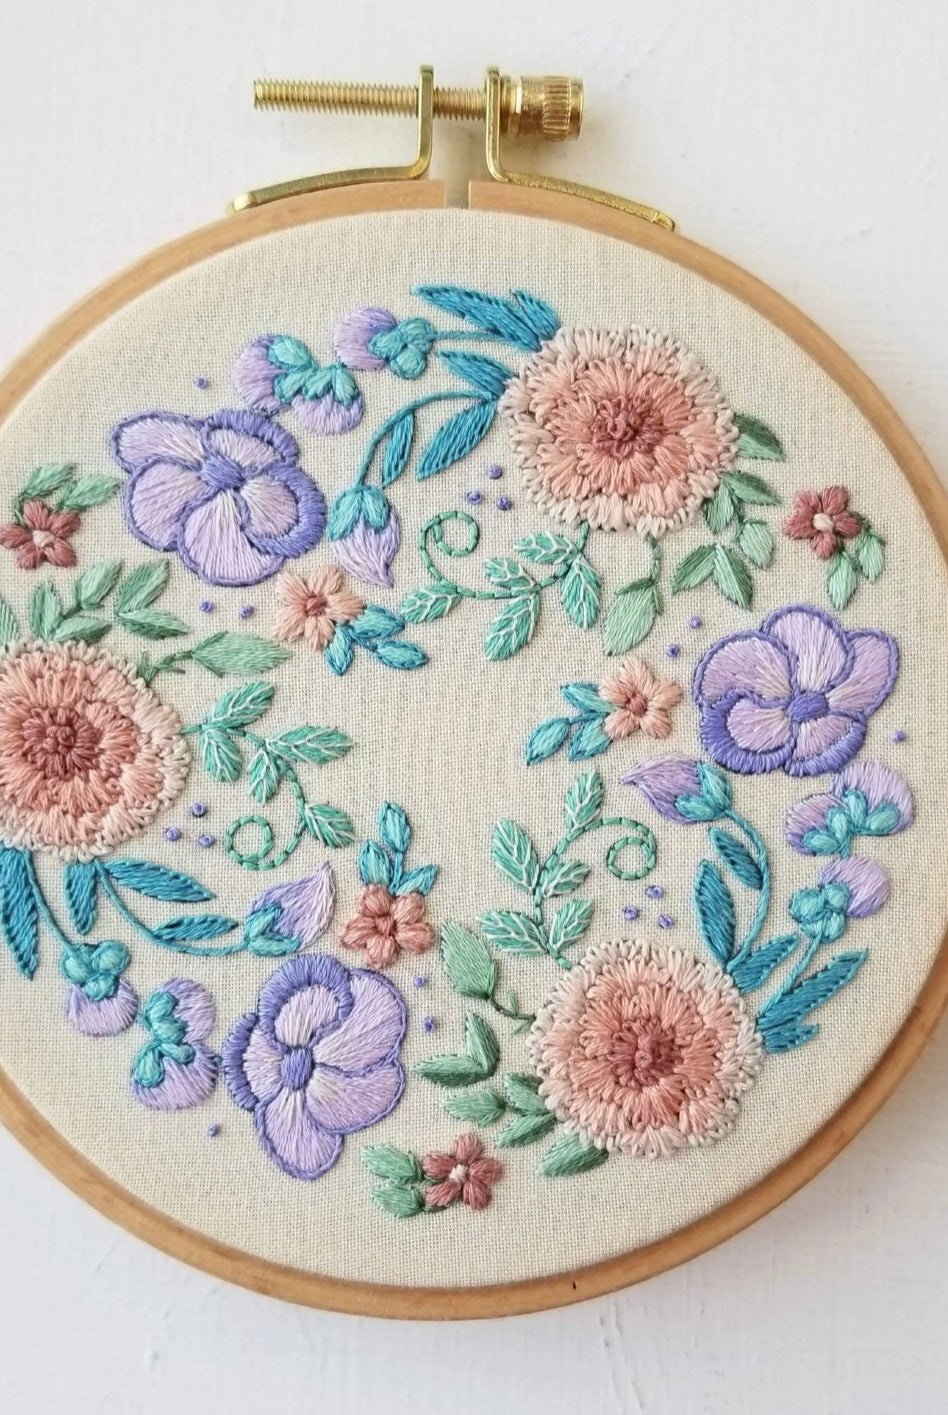 Beginners Stitch Sampler Kit - Level 1 & 2 - Learn Hand Embroidery – Little  Stitchy Bee